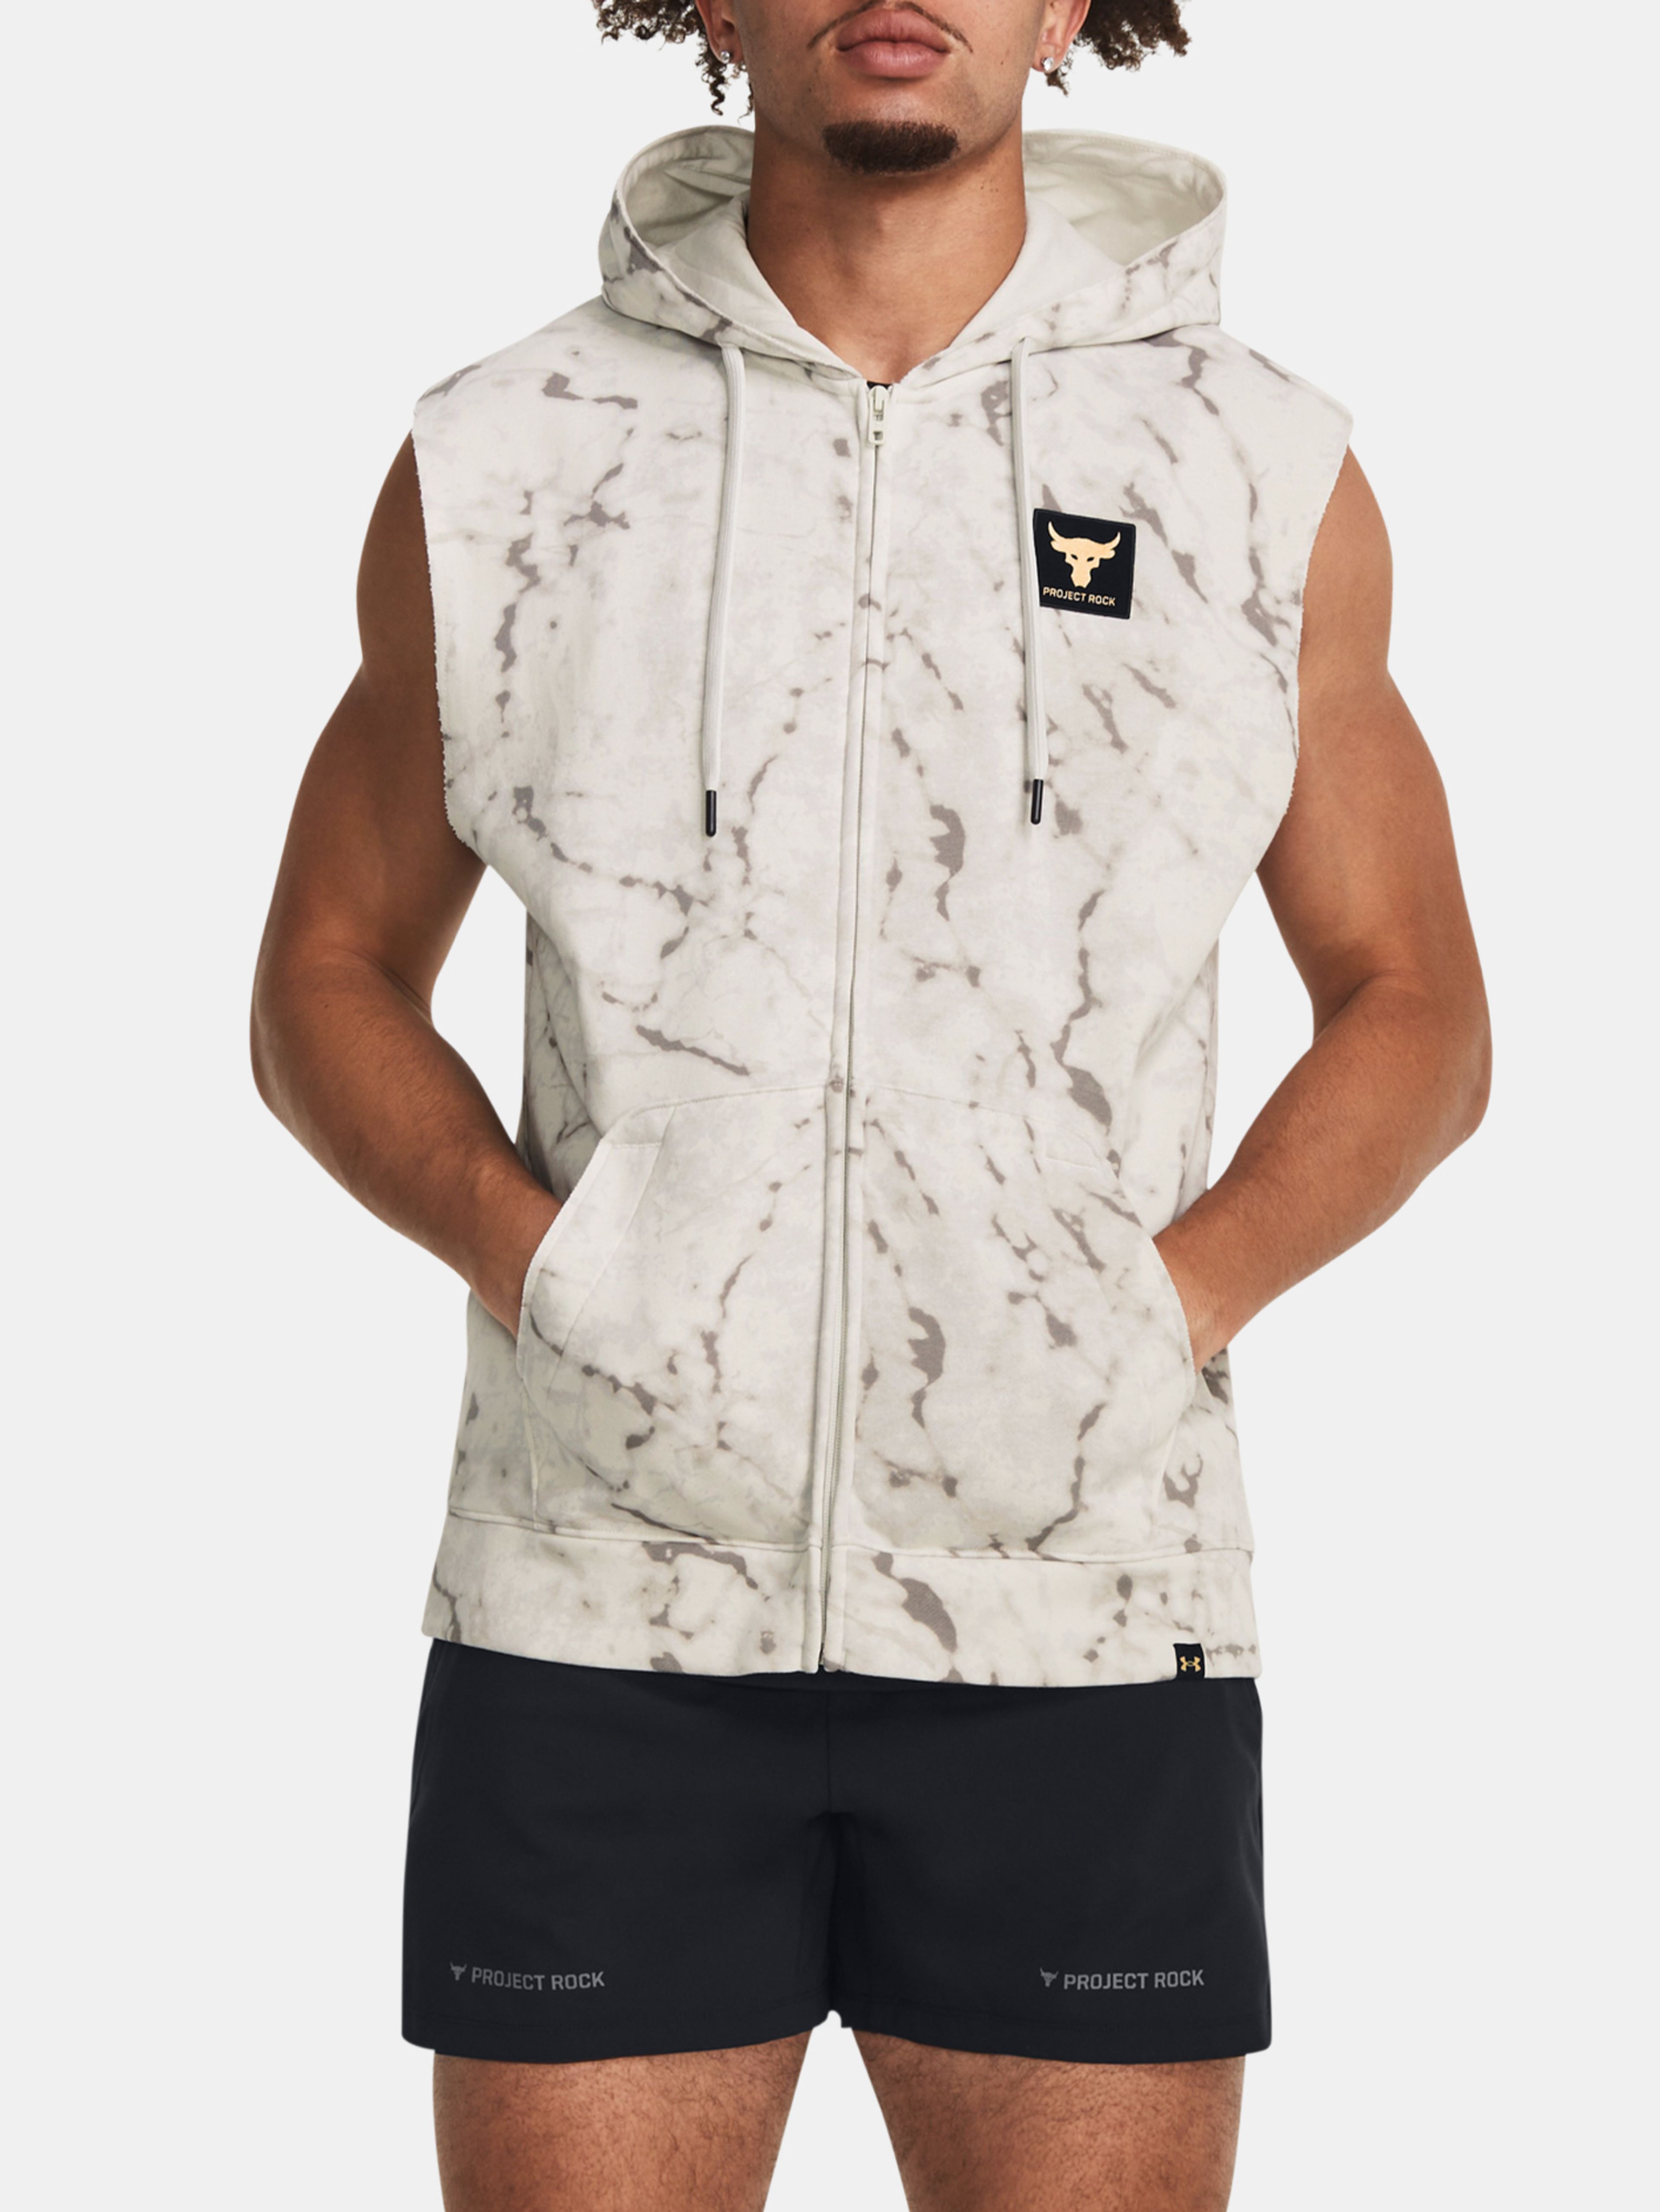 Pulover Under Armour Pjt Rock Rival SL FZ-GRN